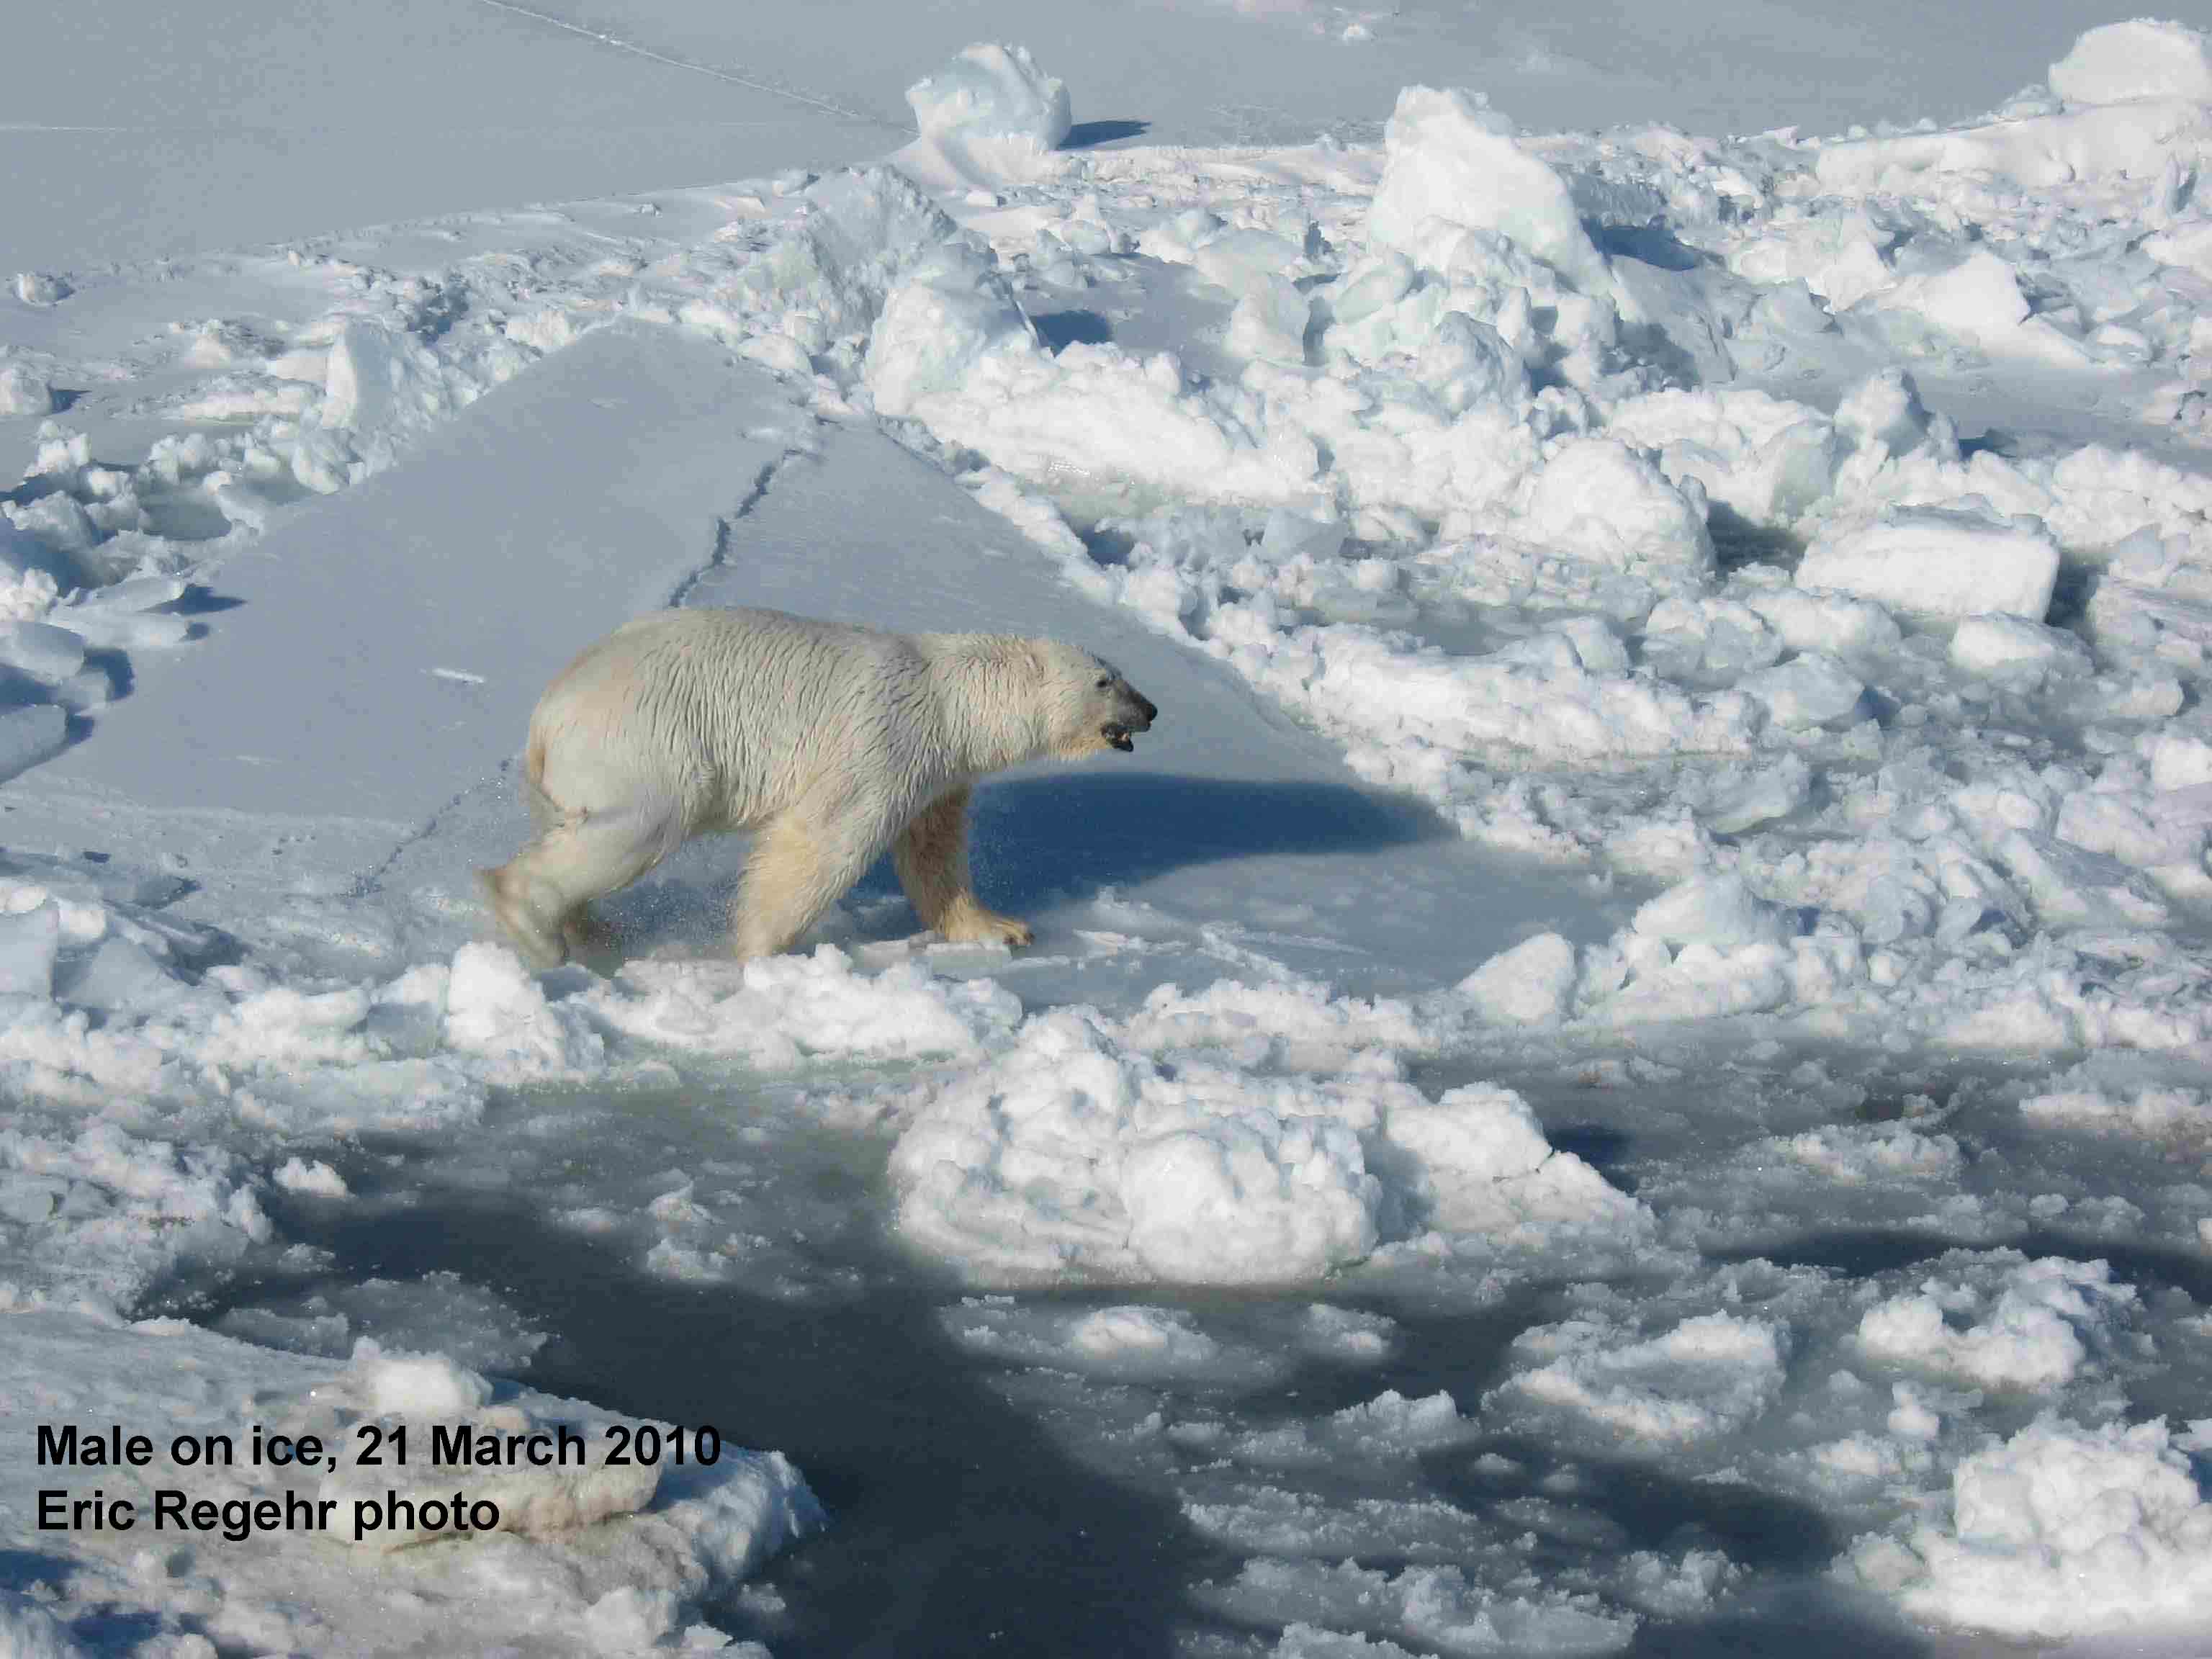 spring ice conditions. polarbearscience